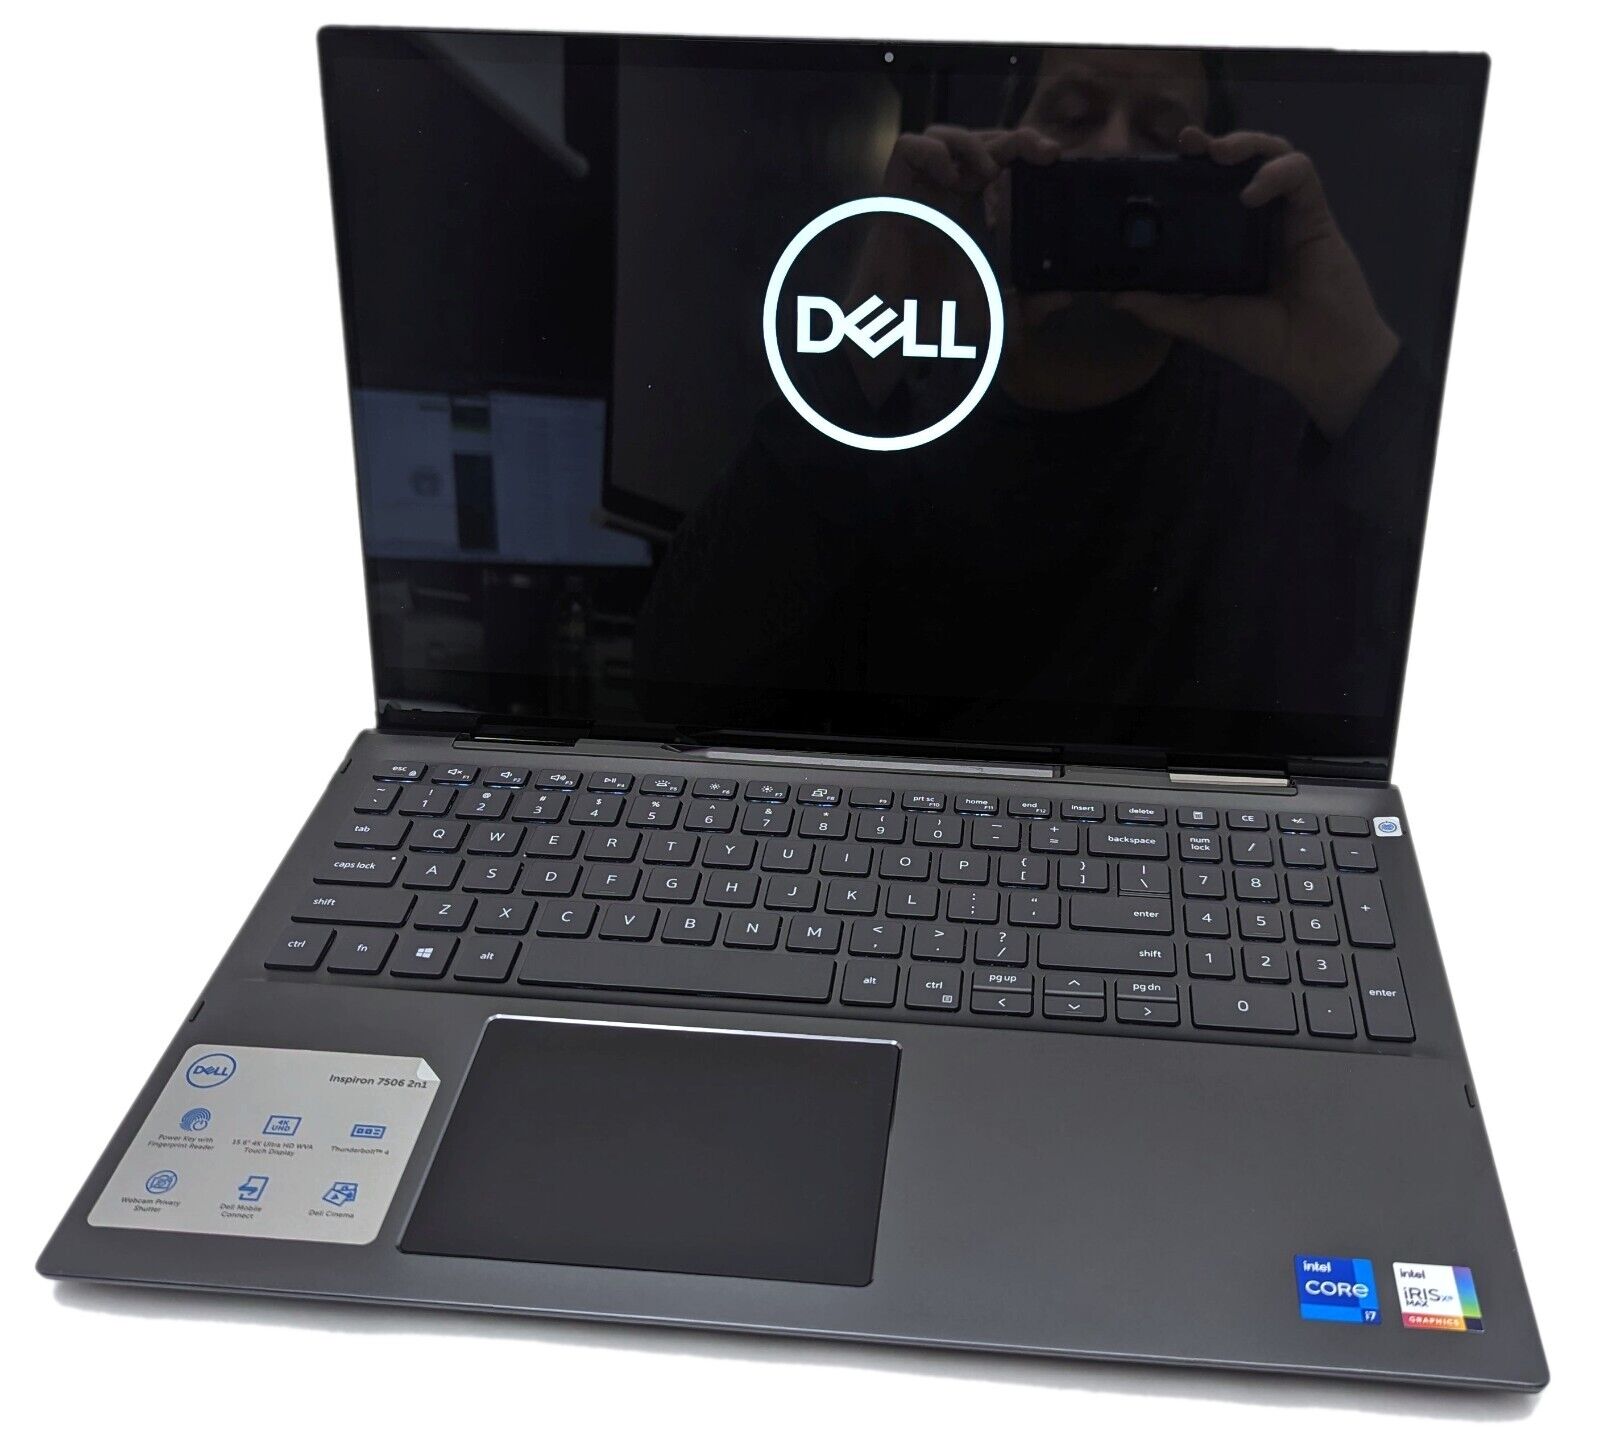 TOUCHPAD ISSUE- Dell Inspiron 7506 2in1 15.6